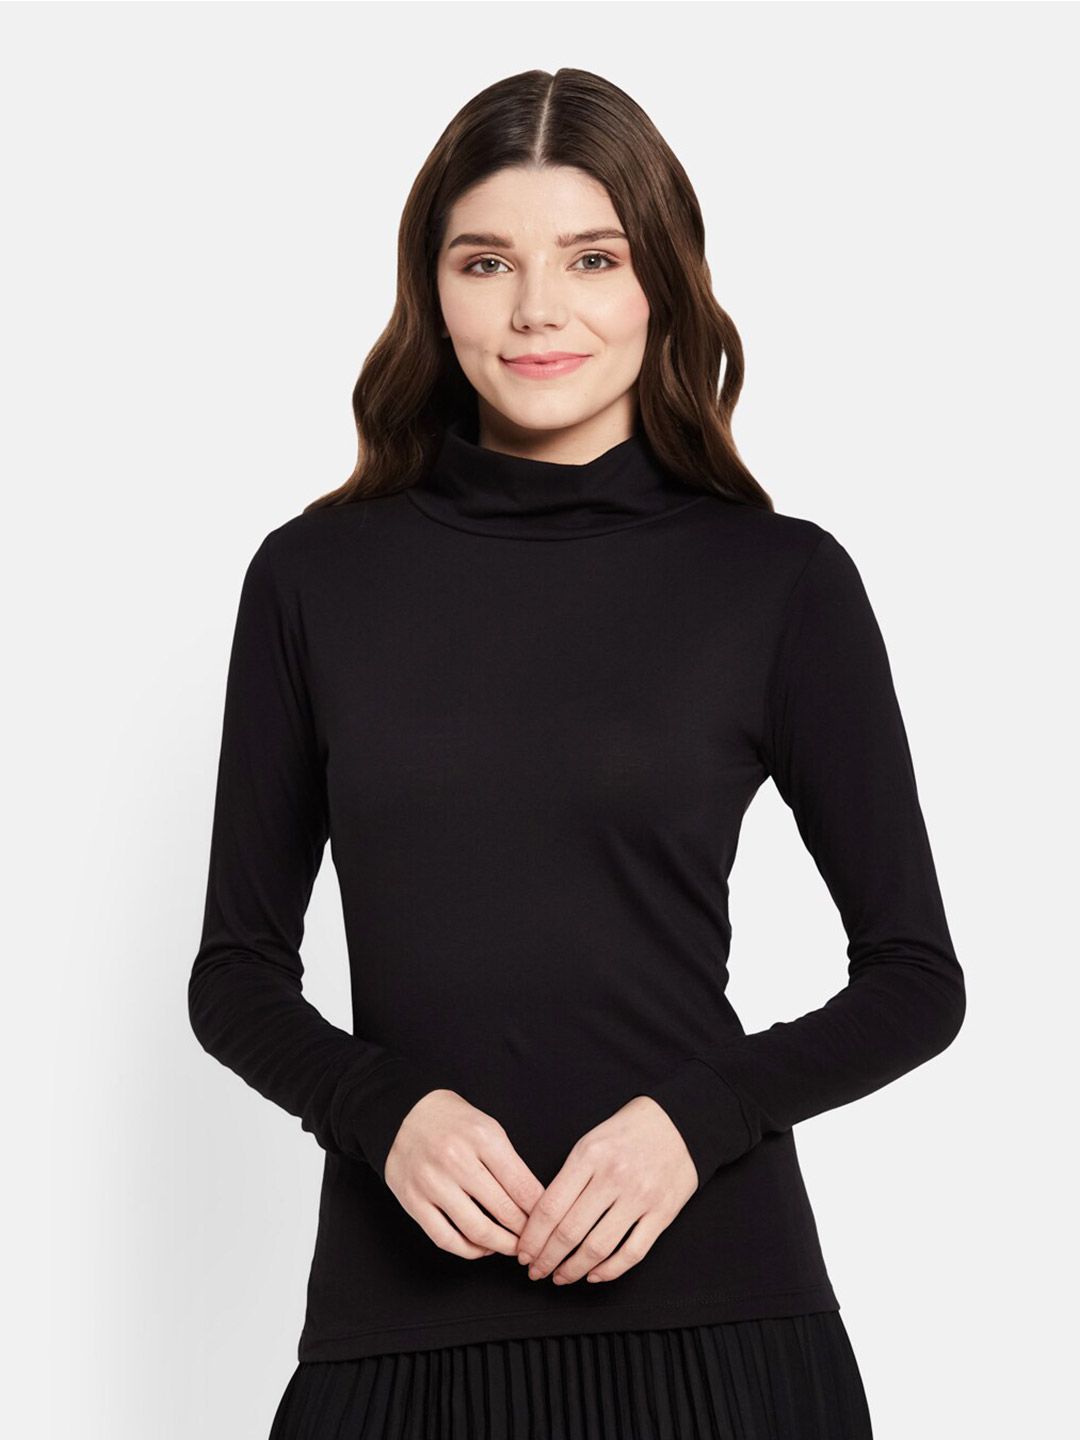 UNMADE Black Cowl Neck Long Sleeves Top Price in India